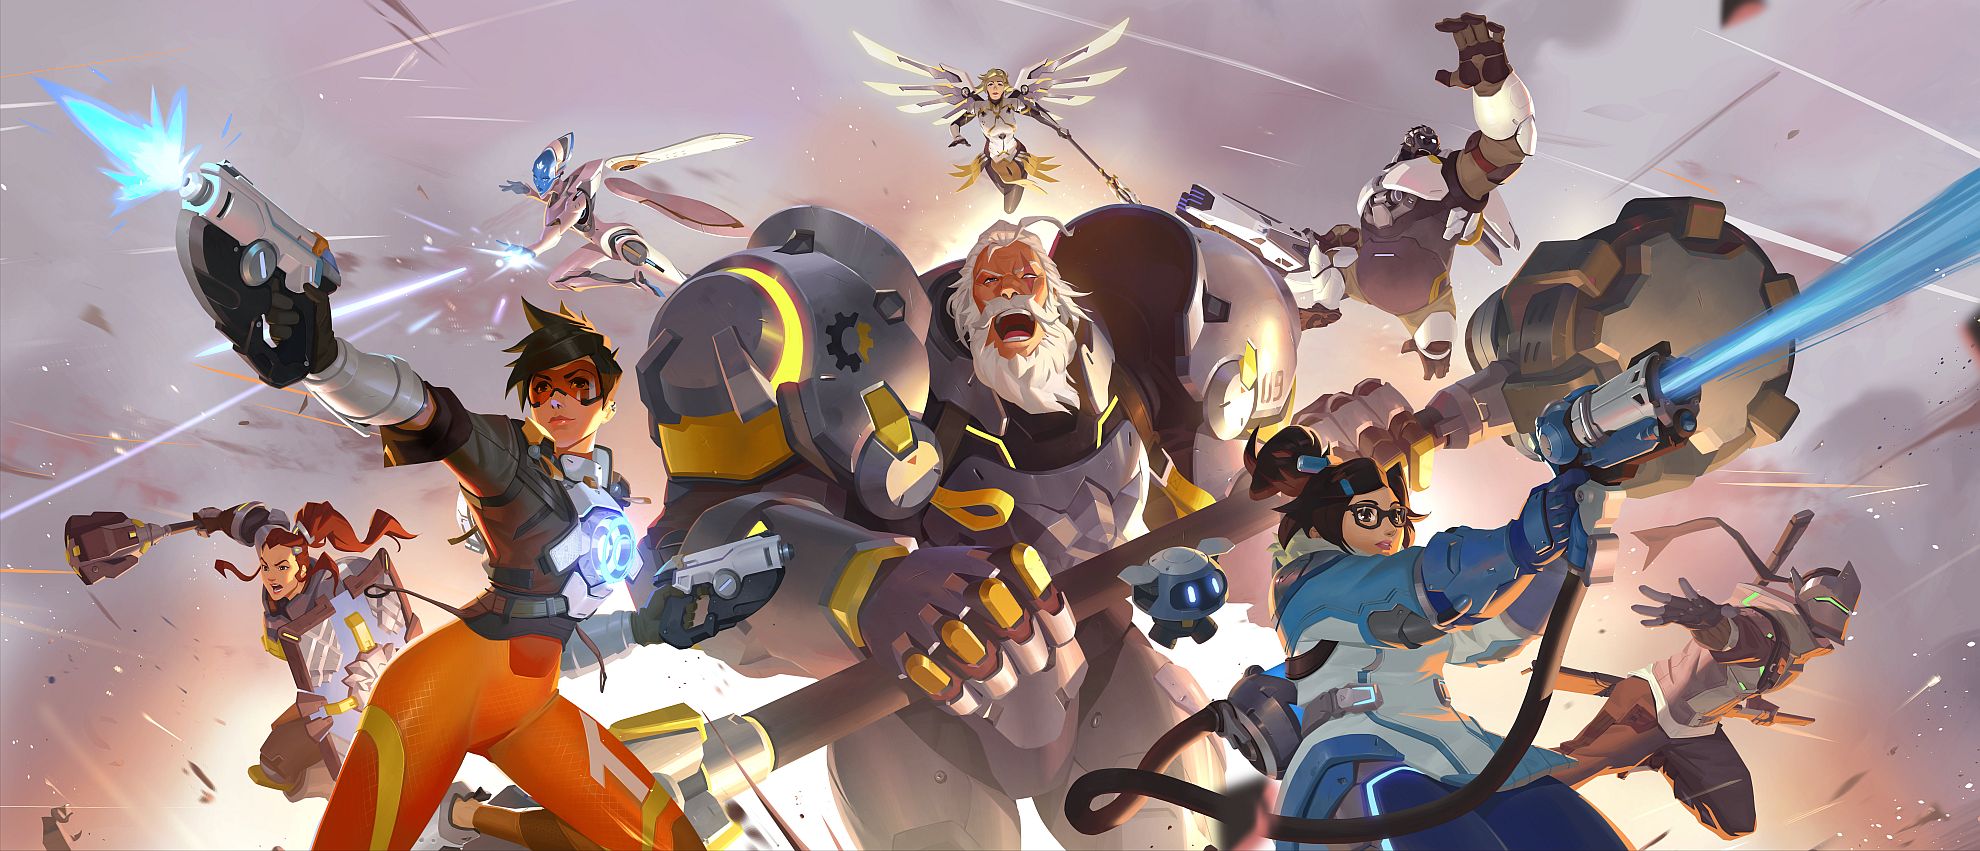 Image for There’s a new hero coming to Overwatch before Sojourn comes to Overwatch 2